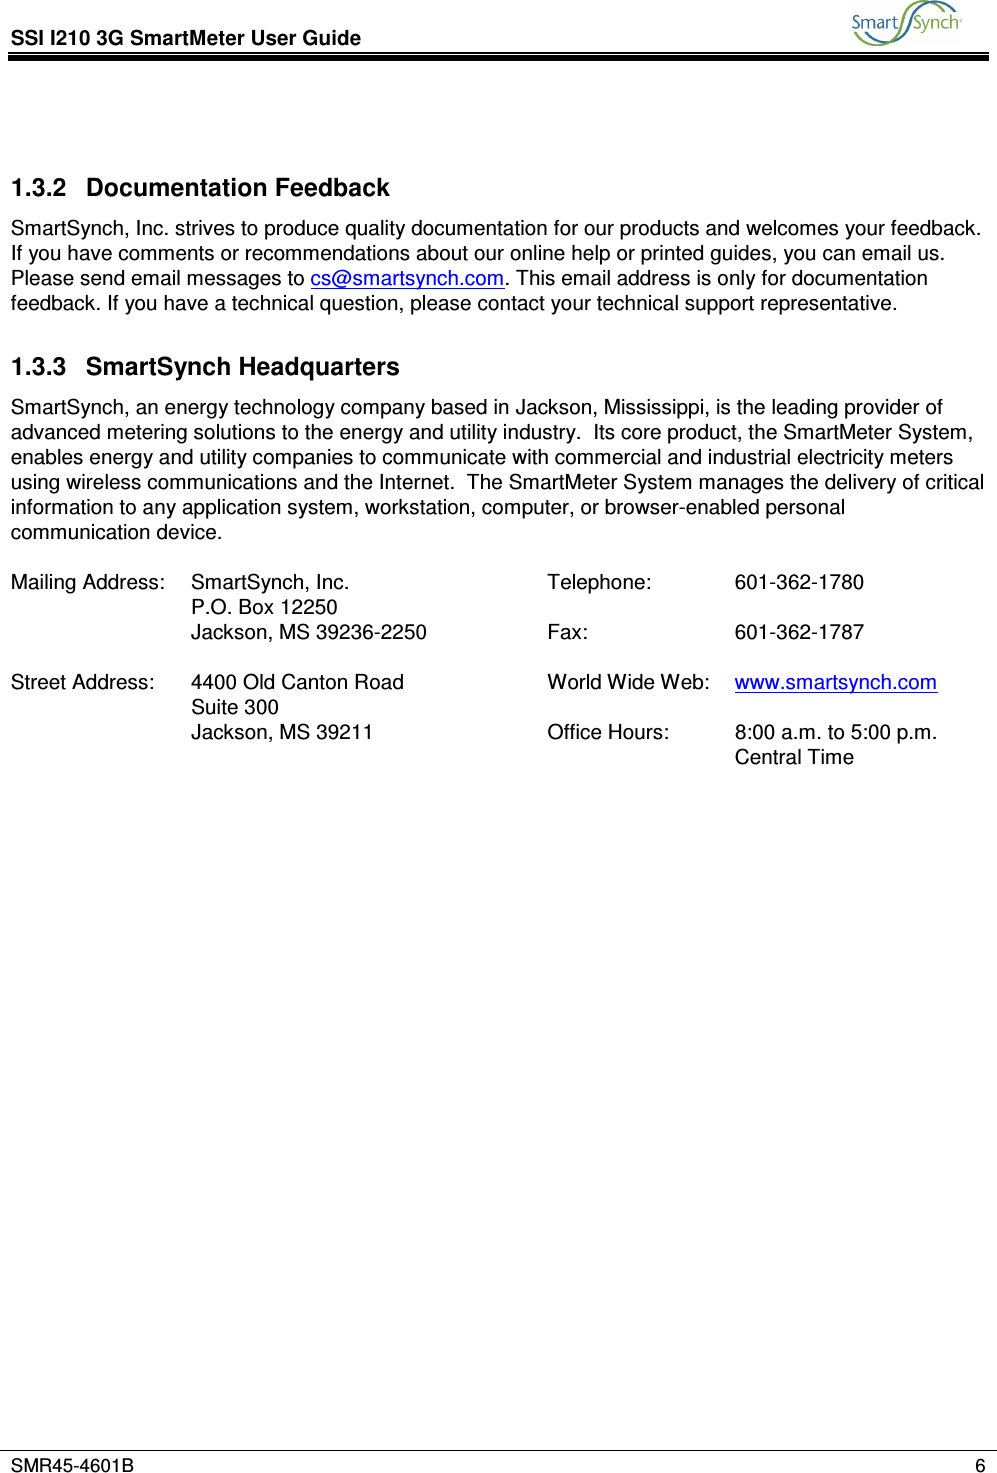 SSI I210 3G SmartMeter User Guide           SMR45-4601B    6   1.3.2  Documentation Feedback SmartSynch, Inc. strives to produce quality documentation for our products and welcomes your feedback. If you have comments or recommendations about our online help or printed guides, you can email us. Please send email messages to cs@smartsynch.com. This email address is only for documentation feedback. If you have a technical question, please contact your technical support representative. 1.3.3  SmartSynch Headquarters SmartSynch, an energy technology company based in Jackson, Mississippi, is the leading provider of advanced metering solutions to the energy and utility industry.  Its core product, the SmartMeter System, enables energy and utility companies to communicate with commercial and industrial electricity meters using wireless communications and the Internet.  The SmartMeter System manages the delivery of critical information to any application system, workstation, computer, or browser-enabled personal communication device.  Mailing Address:  SmartSynch, Inc.  Telephone:  601-362-1780   P.O. Box 12250       Jackson, MS 39236-2250  Fax:  601-362-1787        Street Address:  4400 Old Canton Road  World Wide Web:  www.smartsynch.com   Suite 300       Jackson, MS 39211  Office Hours:  8:00 a.m. to 5:00 p.m. Central Time  